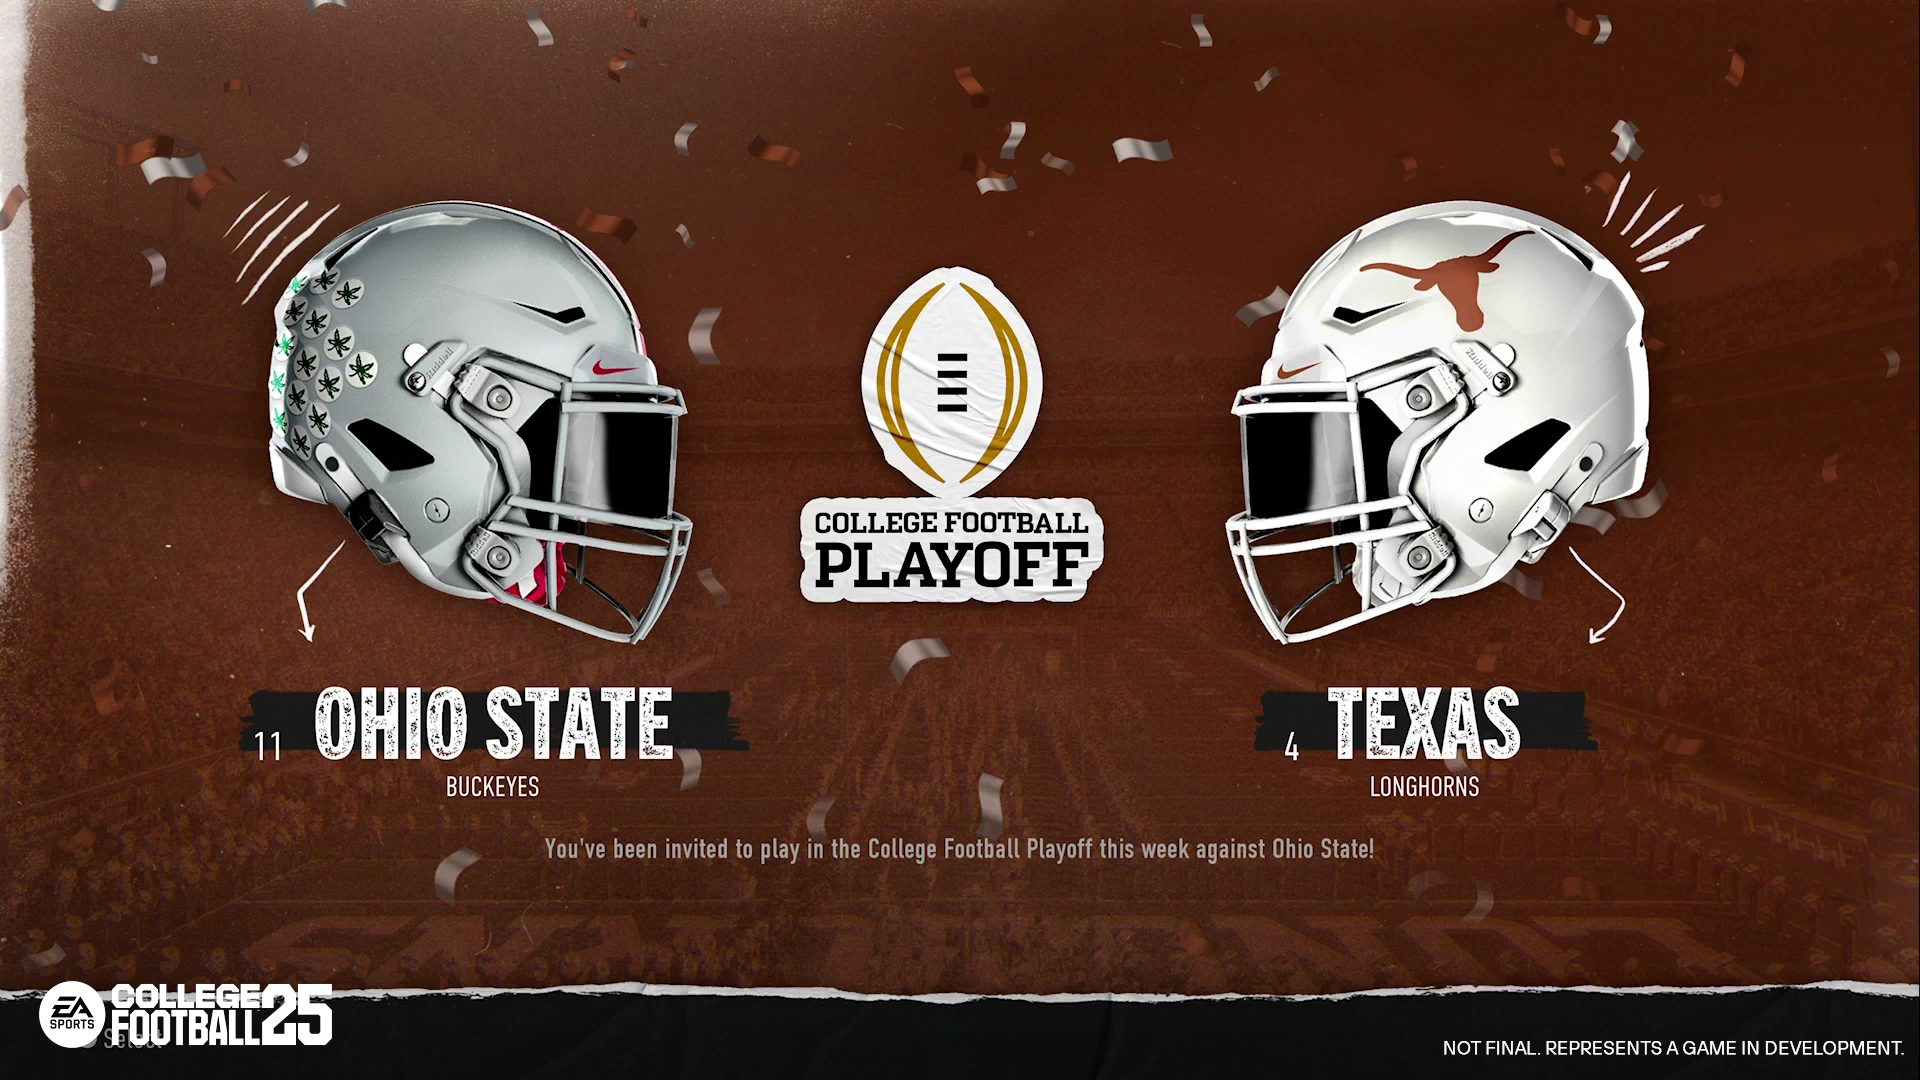 Ohio State and Texas in College Football 25 Dynasty Mode.